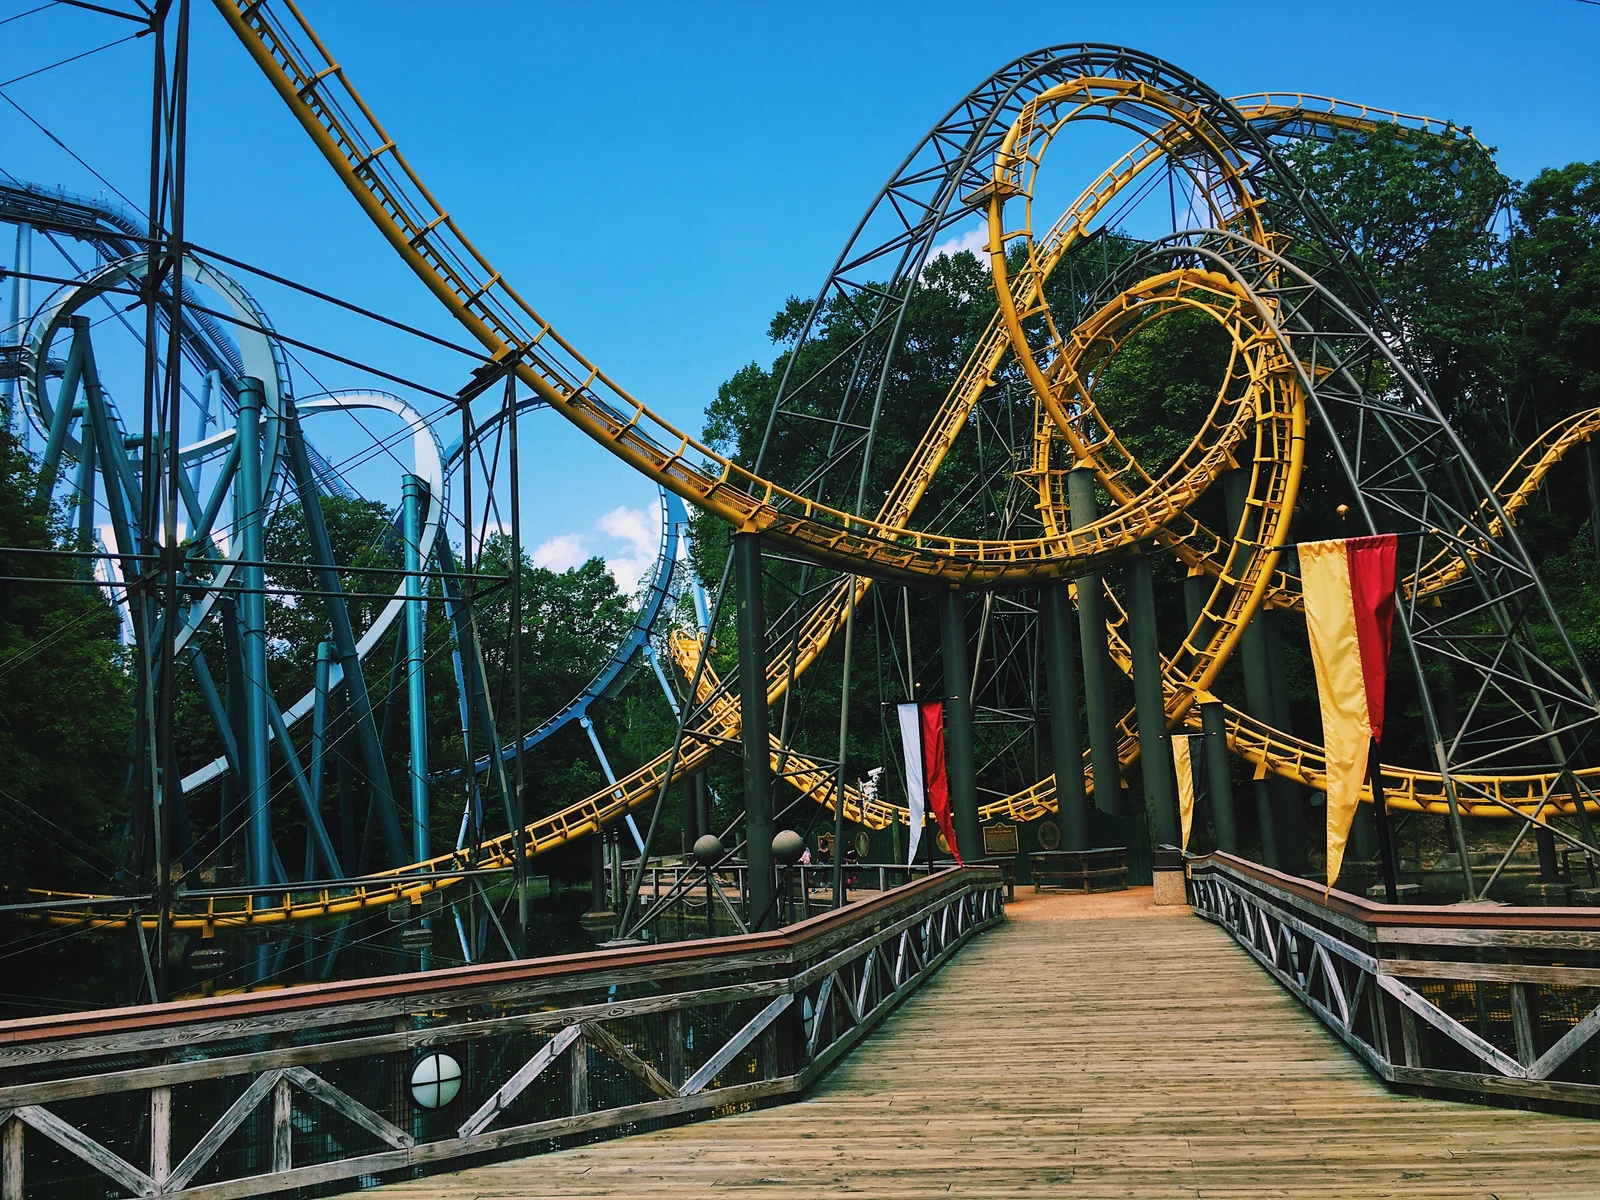 Complex winding roller coaster rails over a boardwalk at Busch Gardens in Williamsburg, Virginia, one of the best roller coaster parks in the US